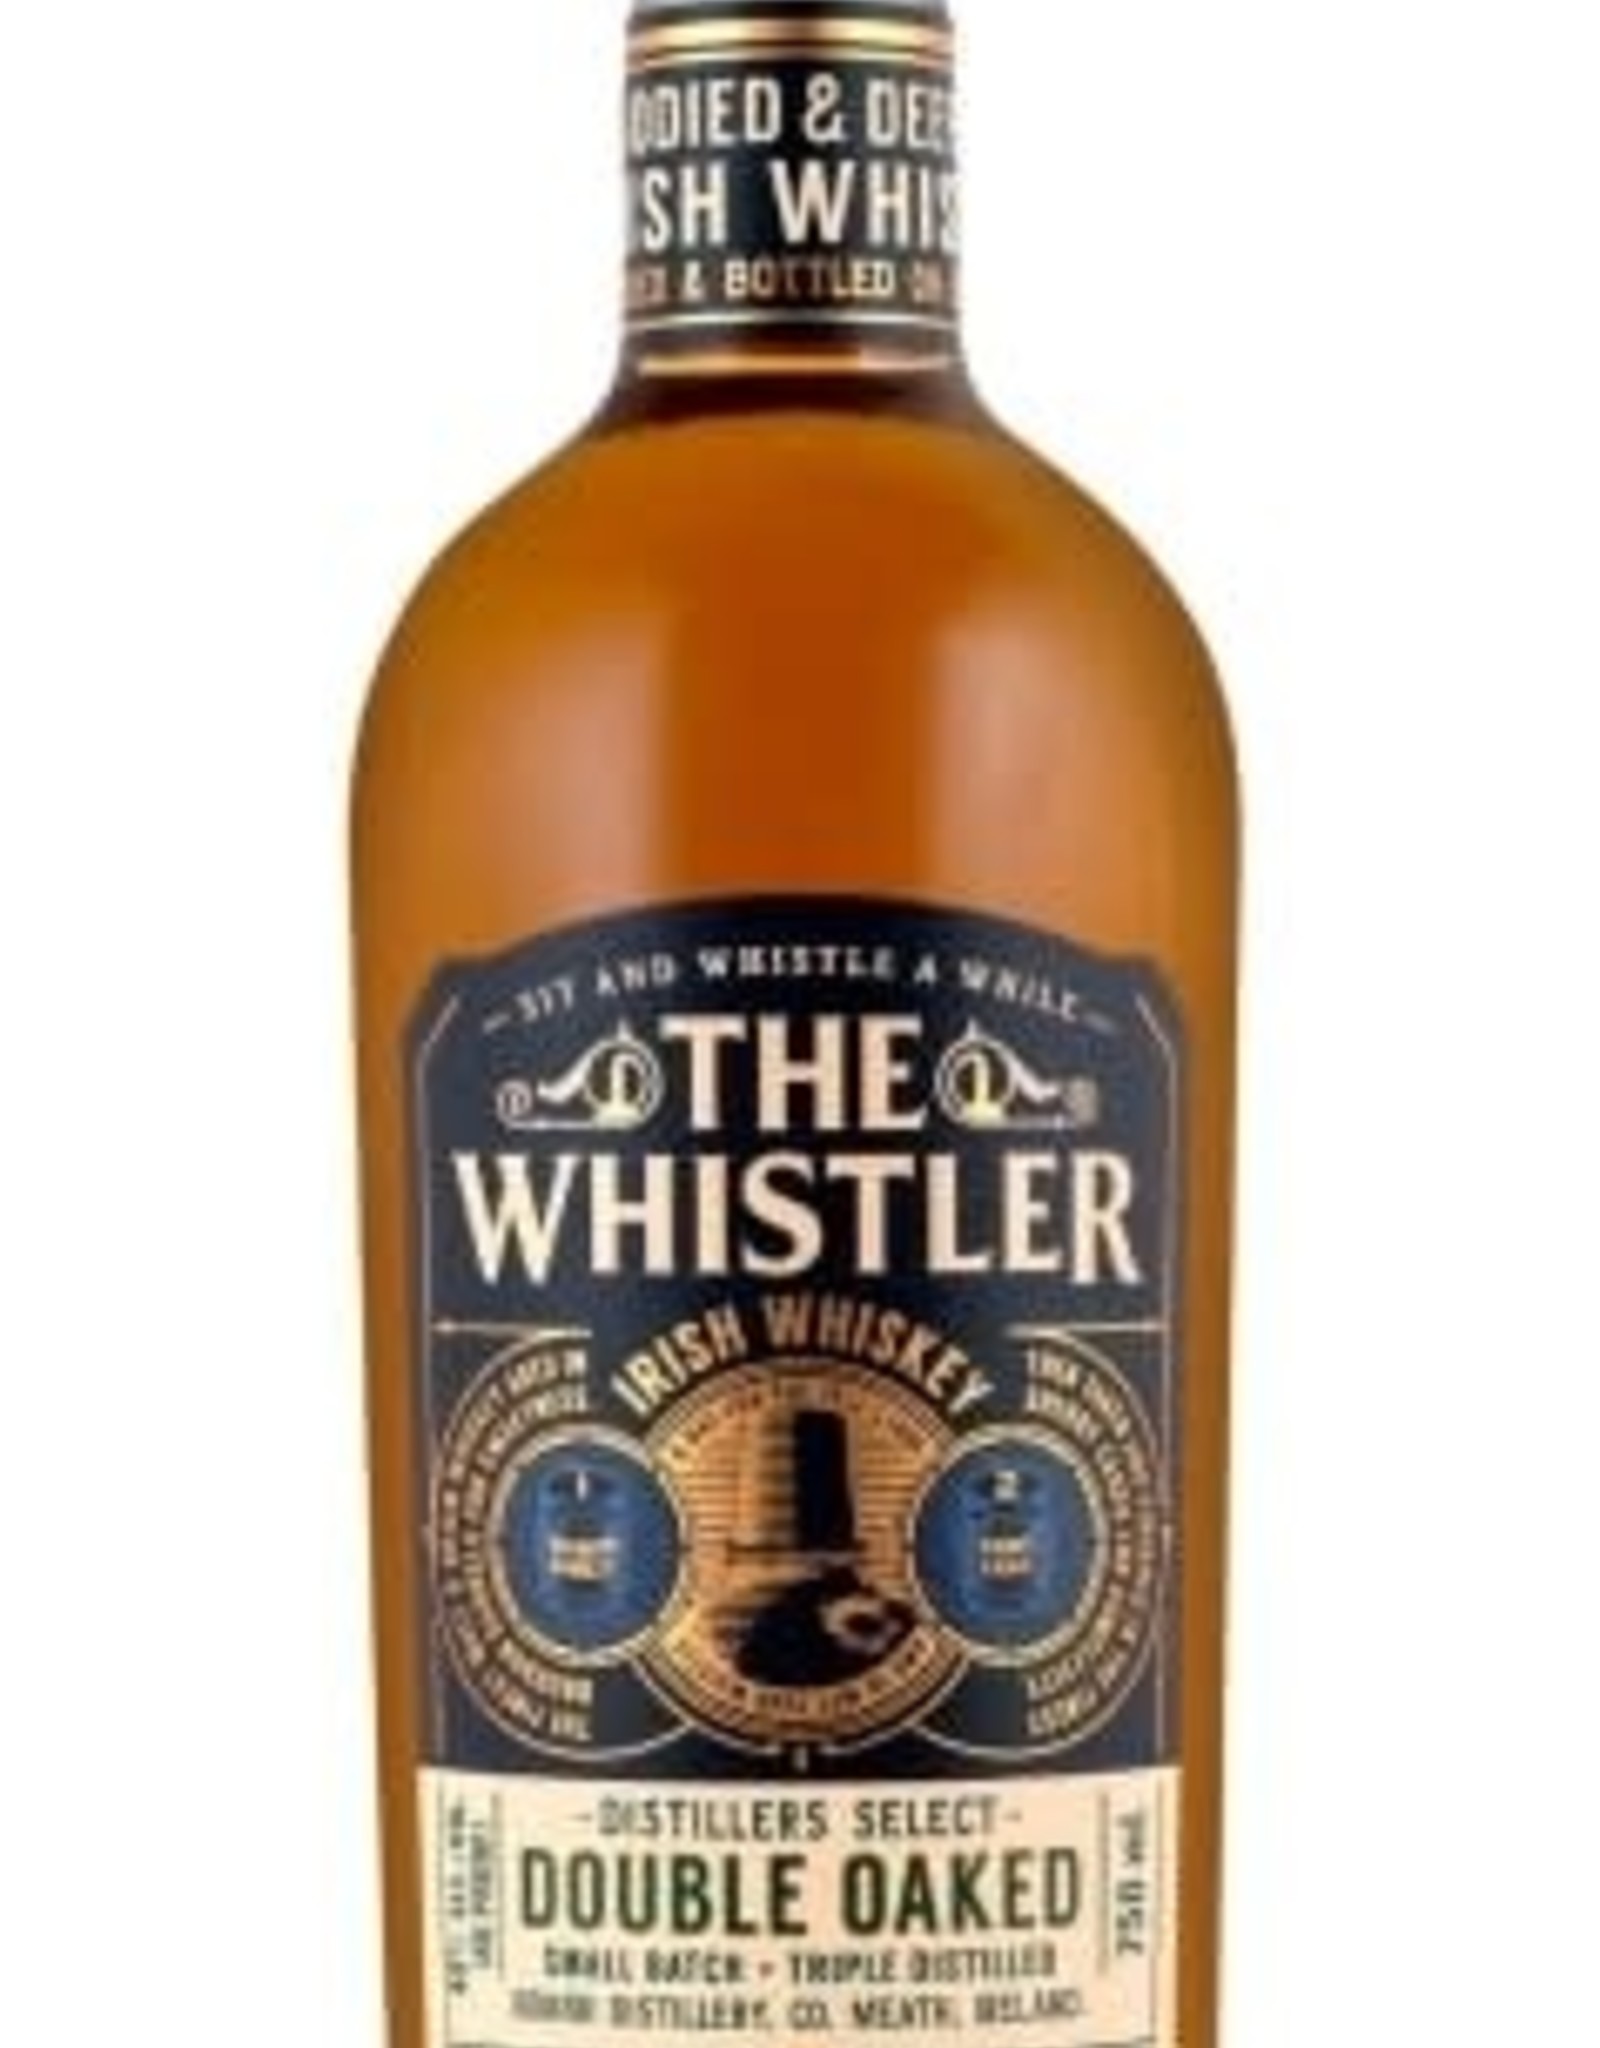 The Whistler Double Oaked